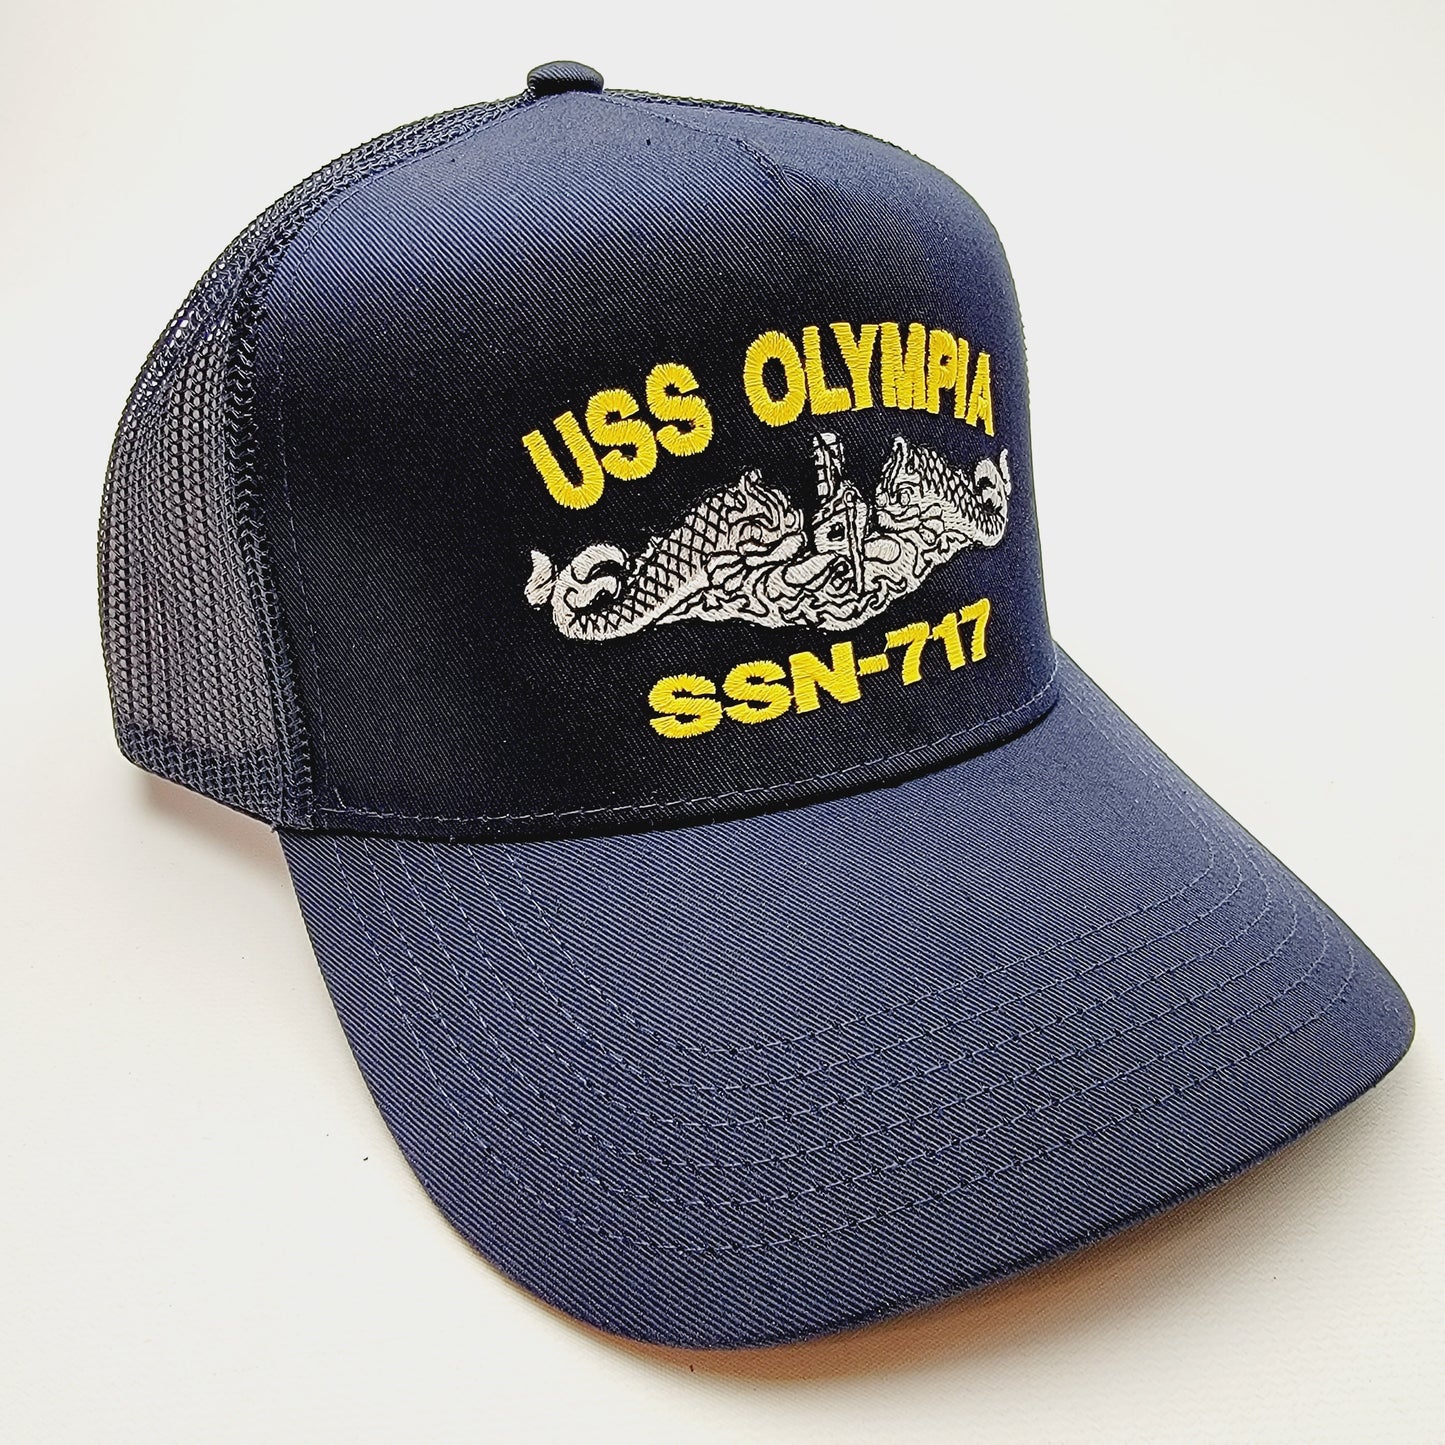 US NAVY USS OLYMPIA SSN-717 Embroidered Hat Baseball Cap Adjustable Blue